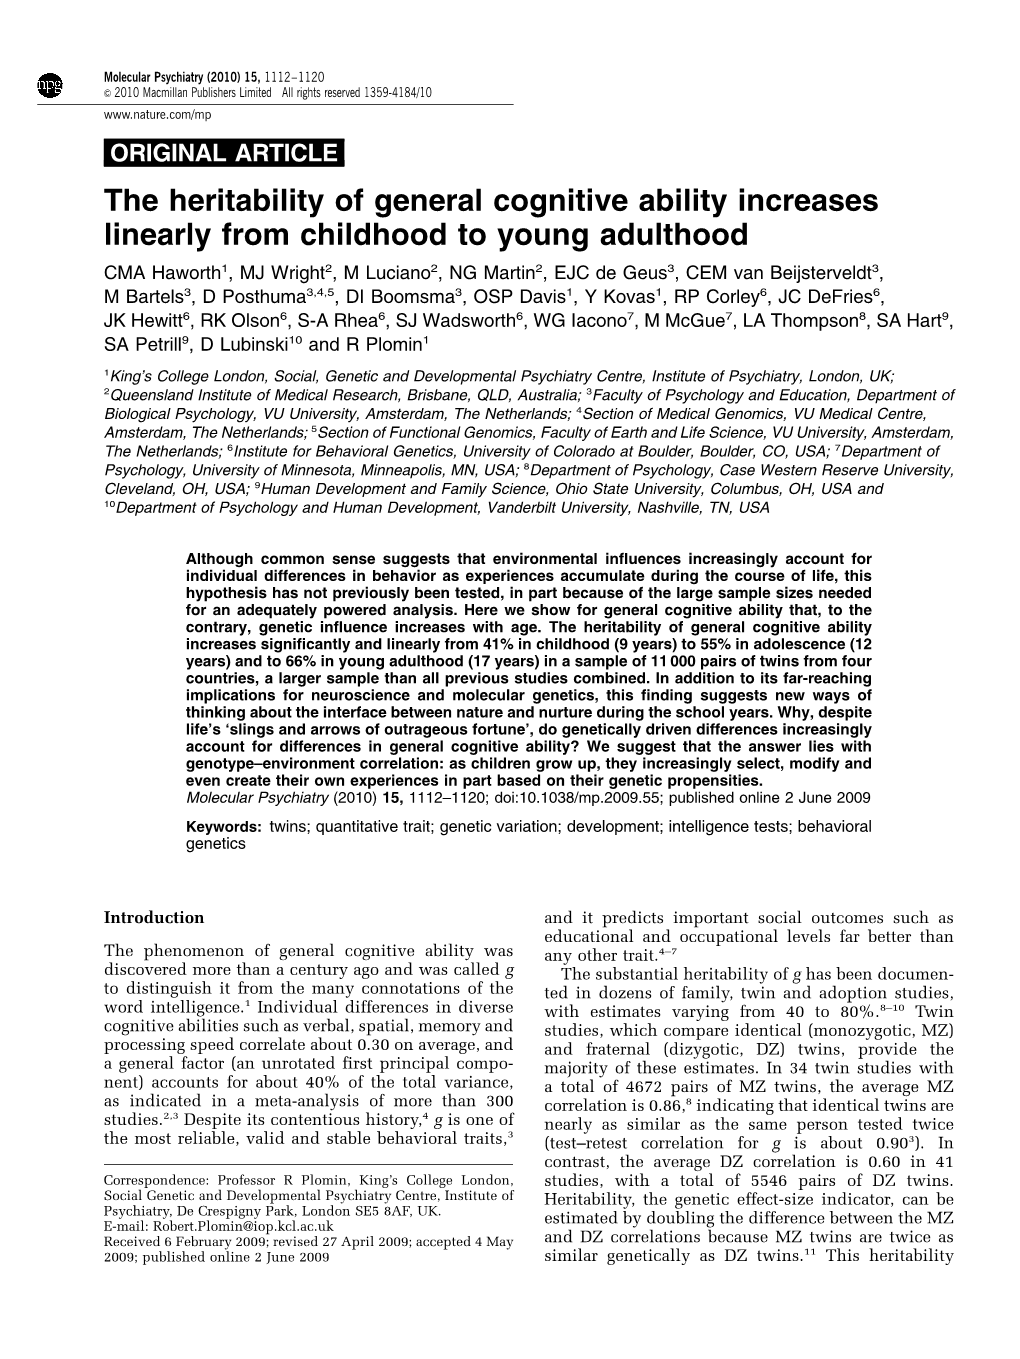 The Heritability of General Cognitive Ability Increases Linearly From